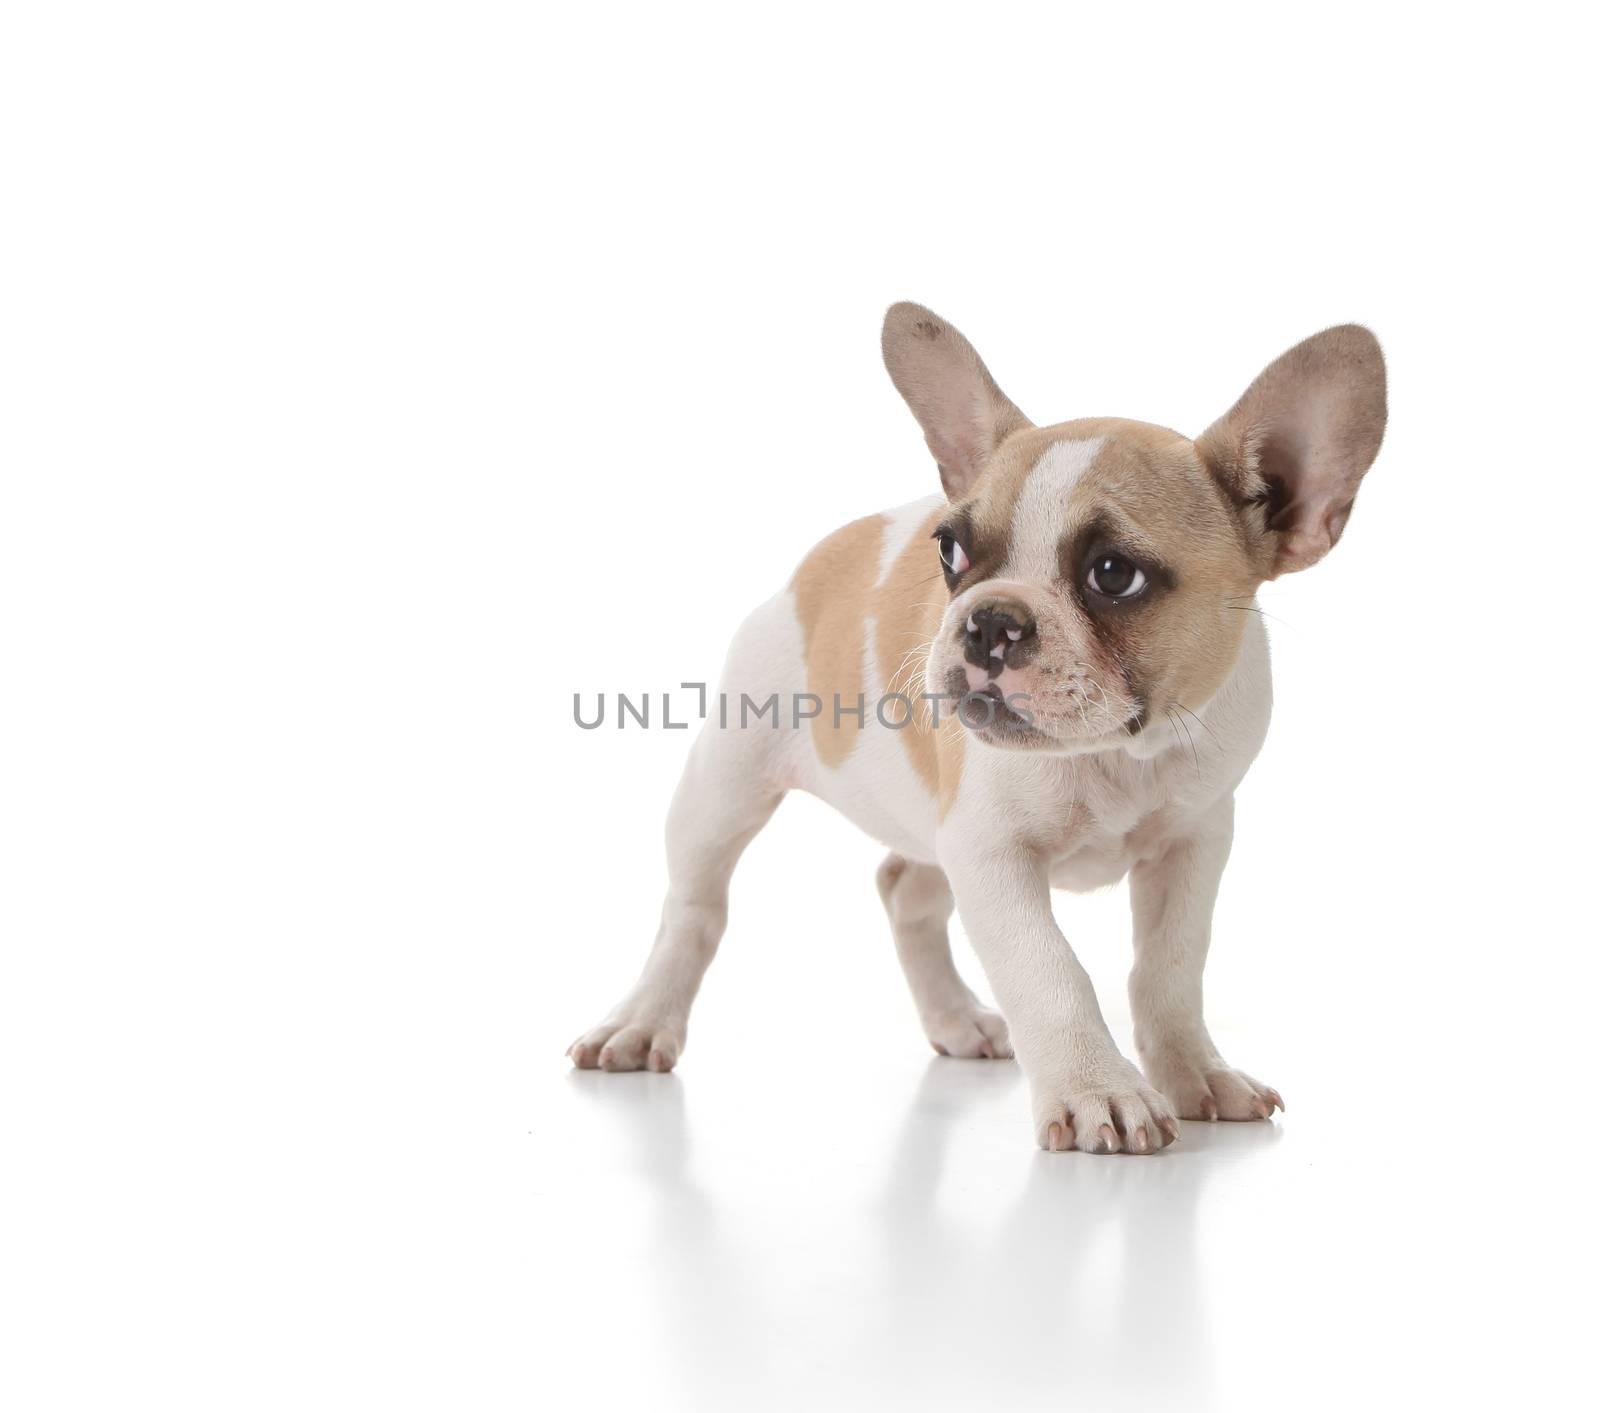 Sweet Timid Puppy Dog Looking to the Side on White Background